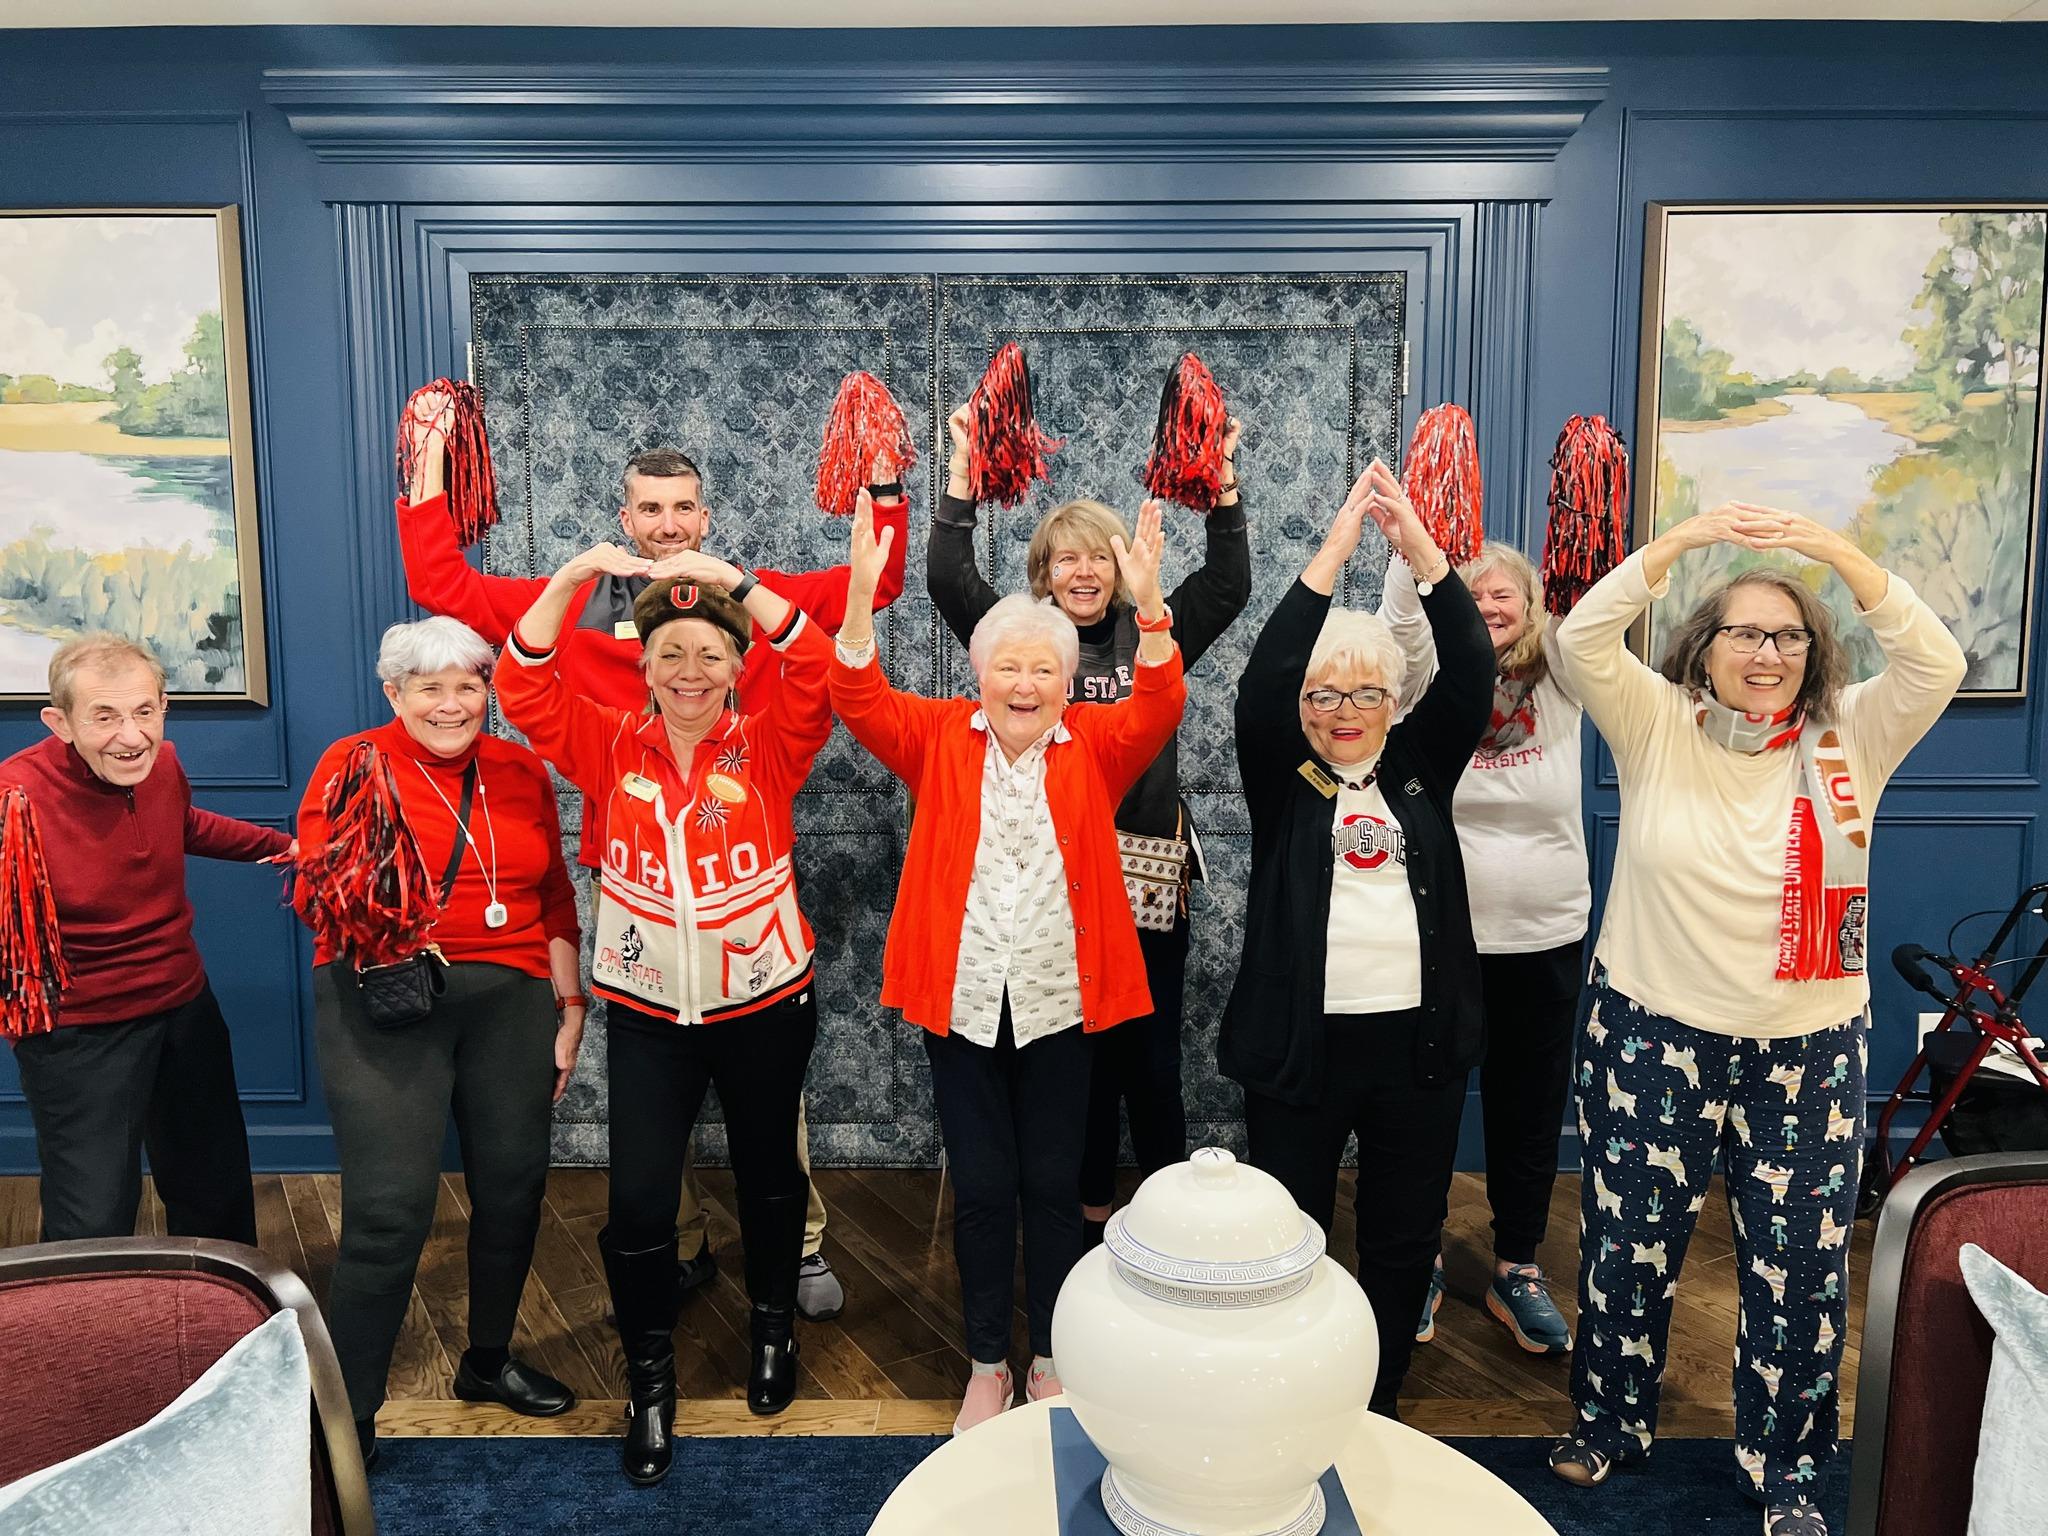 Group of cheerful adults in red and white, posing with hands raised in a celebratory gesture.